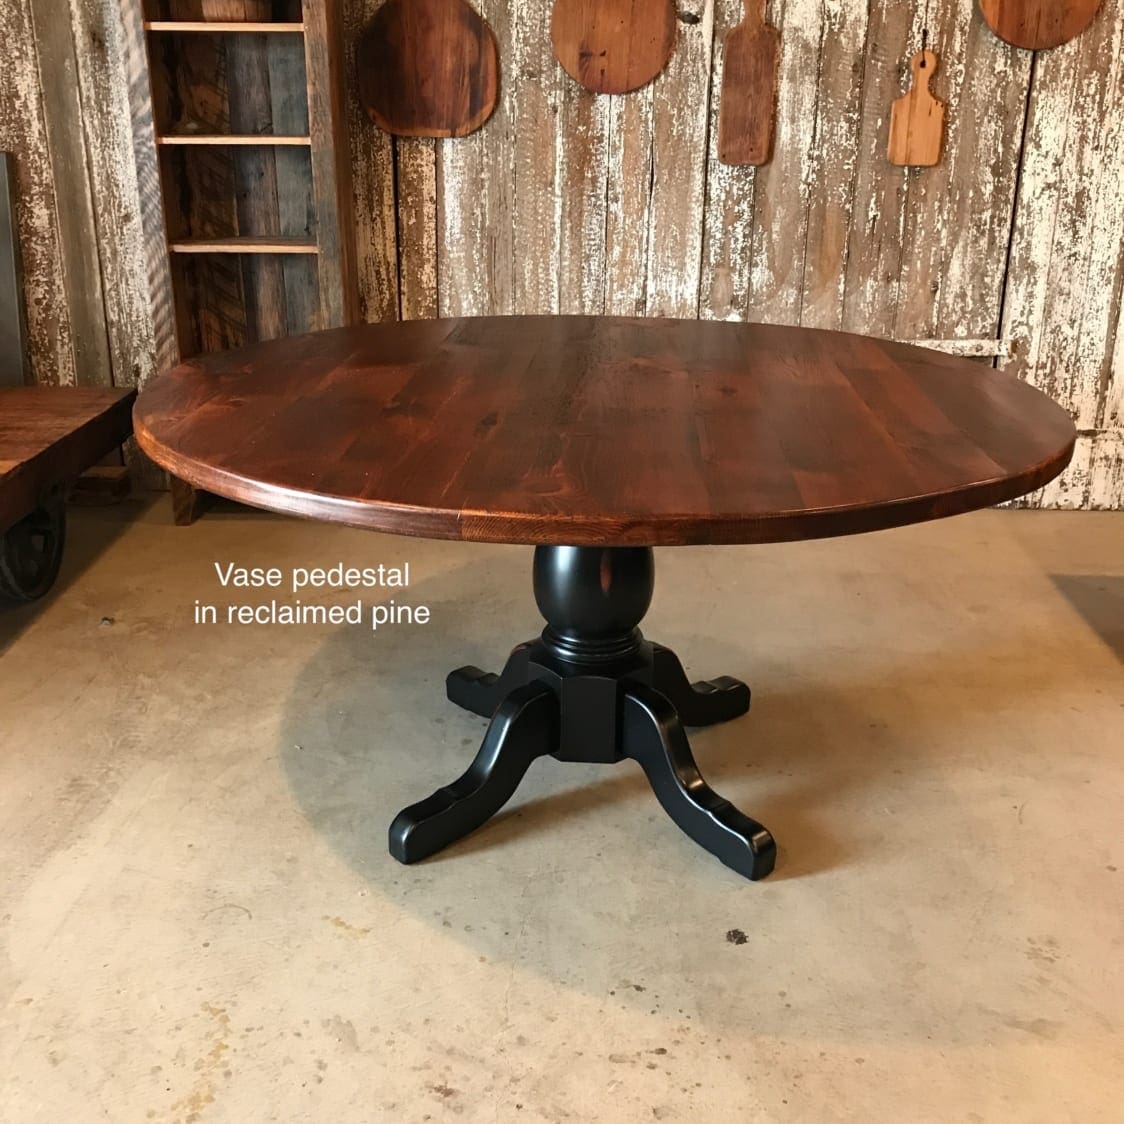 Single pedestal table, Rustic round table